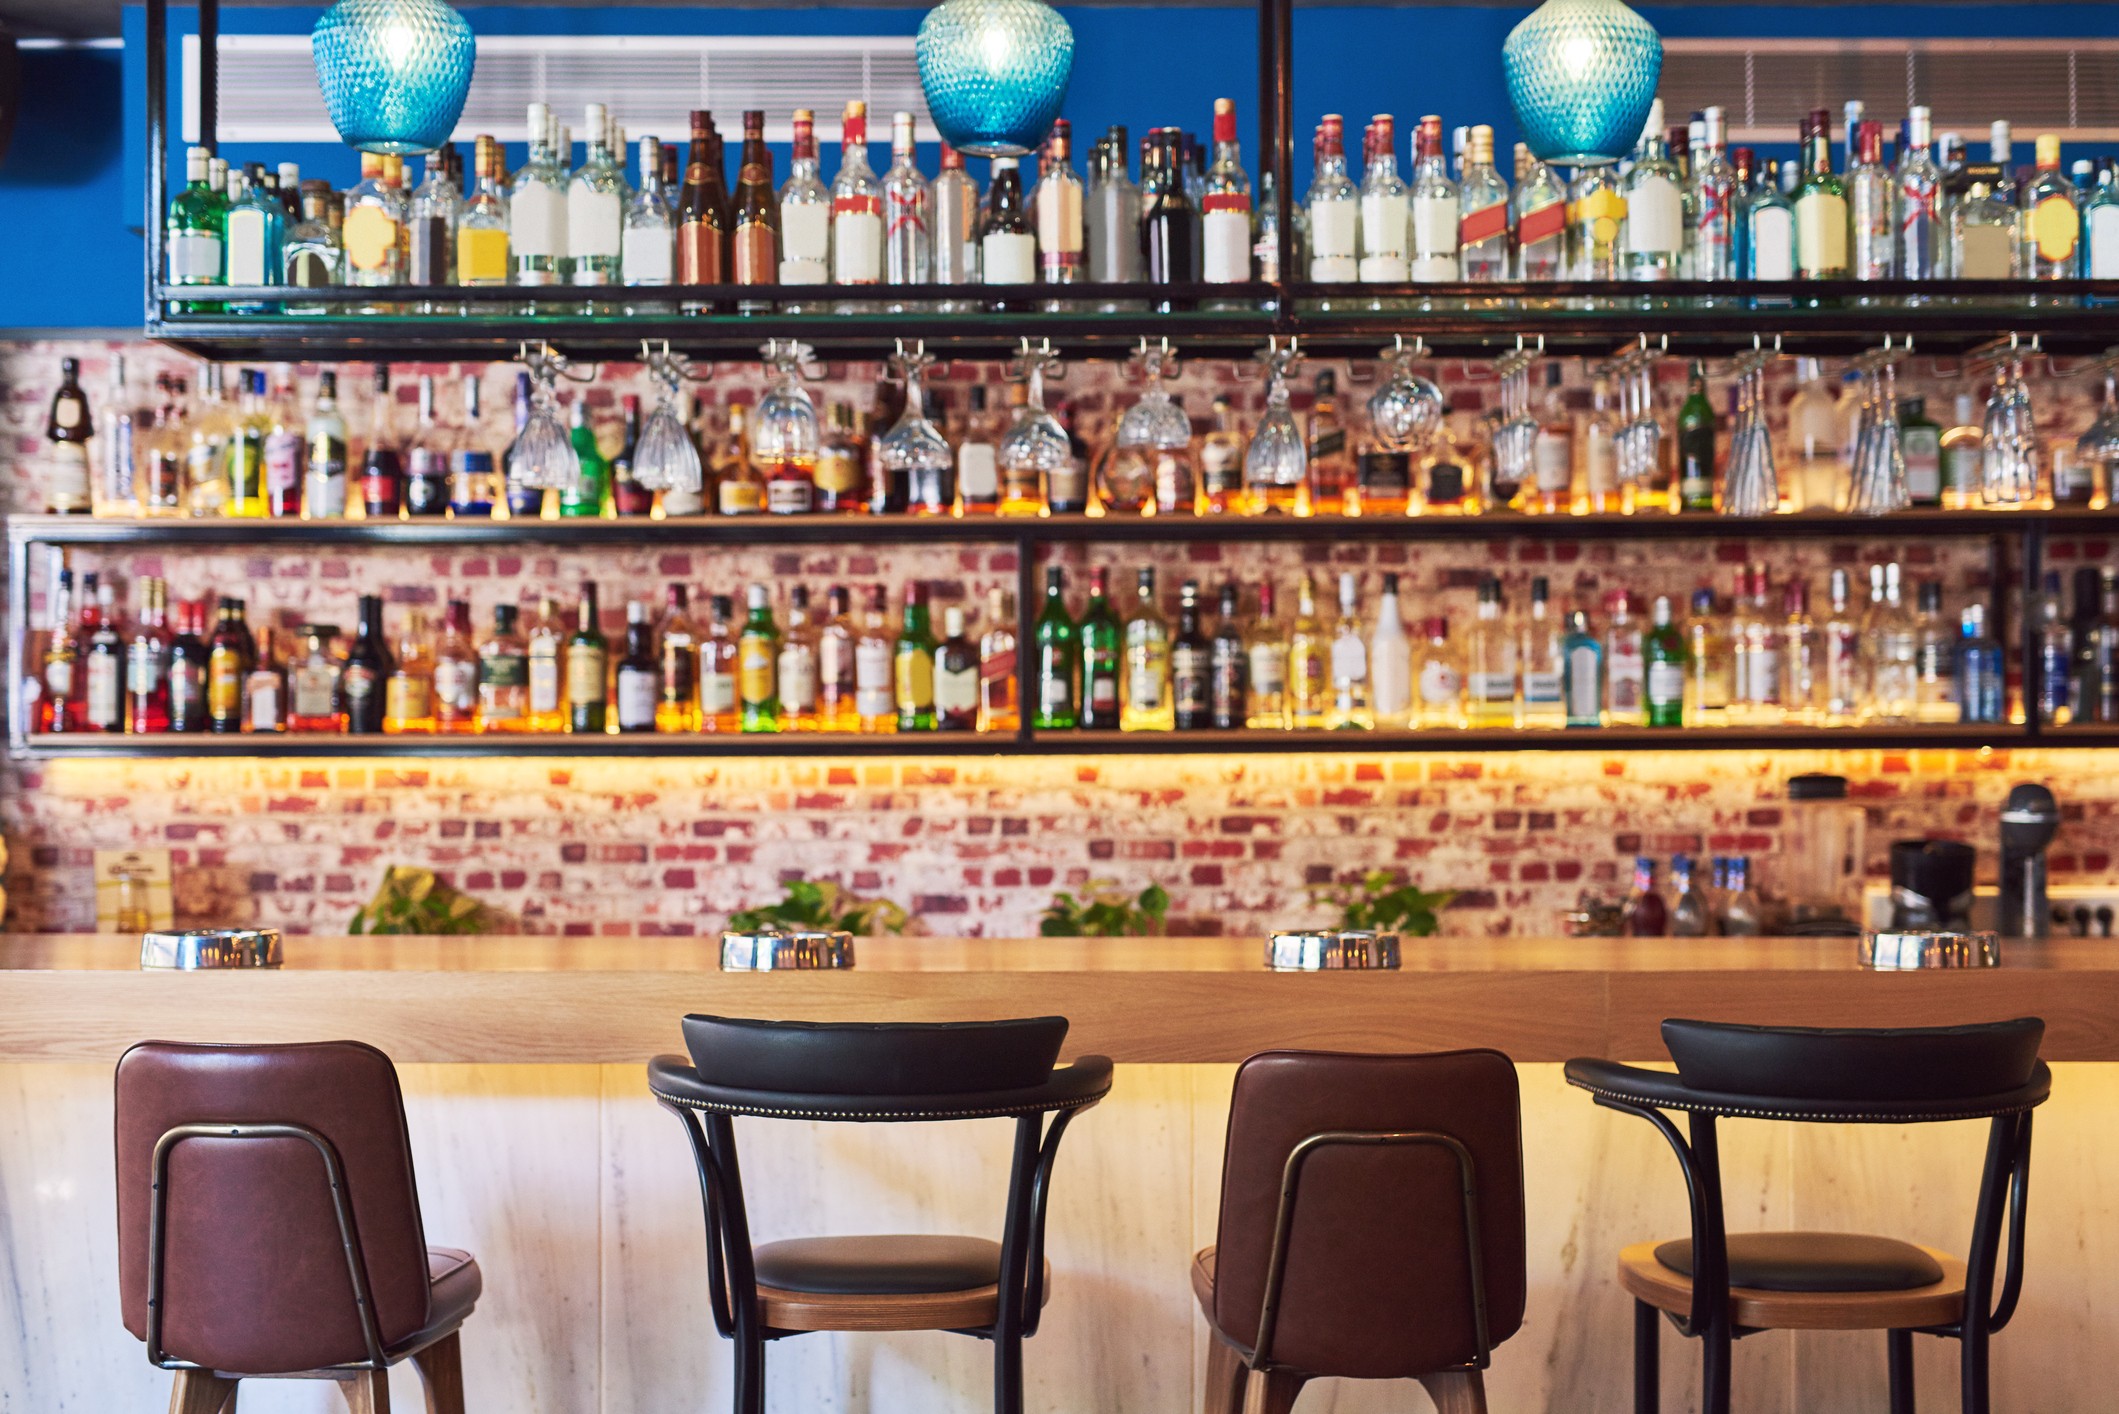 Shot of an immaculate bar with many bottles and glasses with no people (Foto: Getty Images)